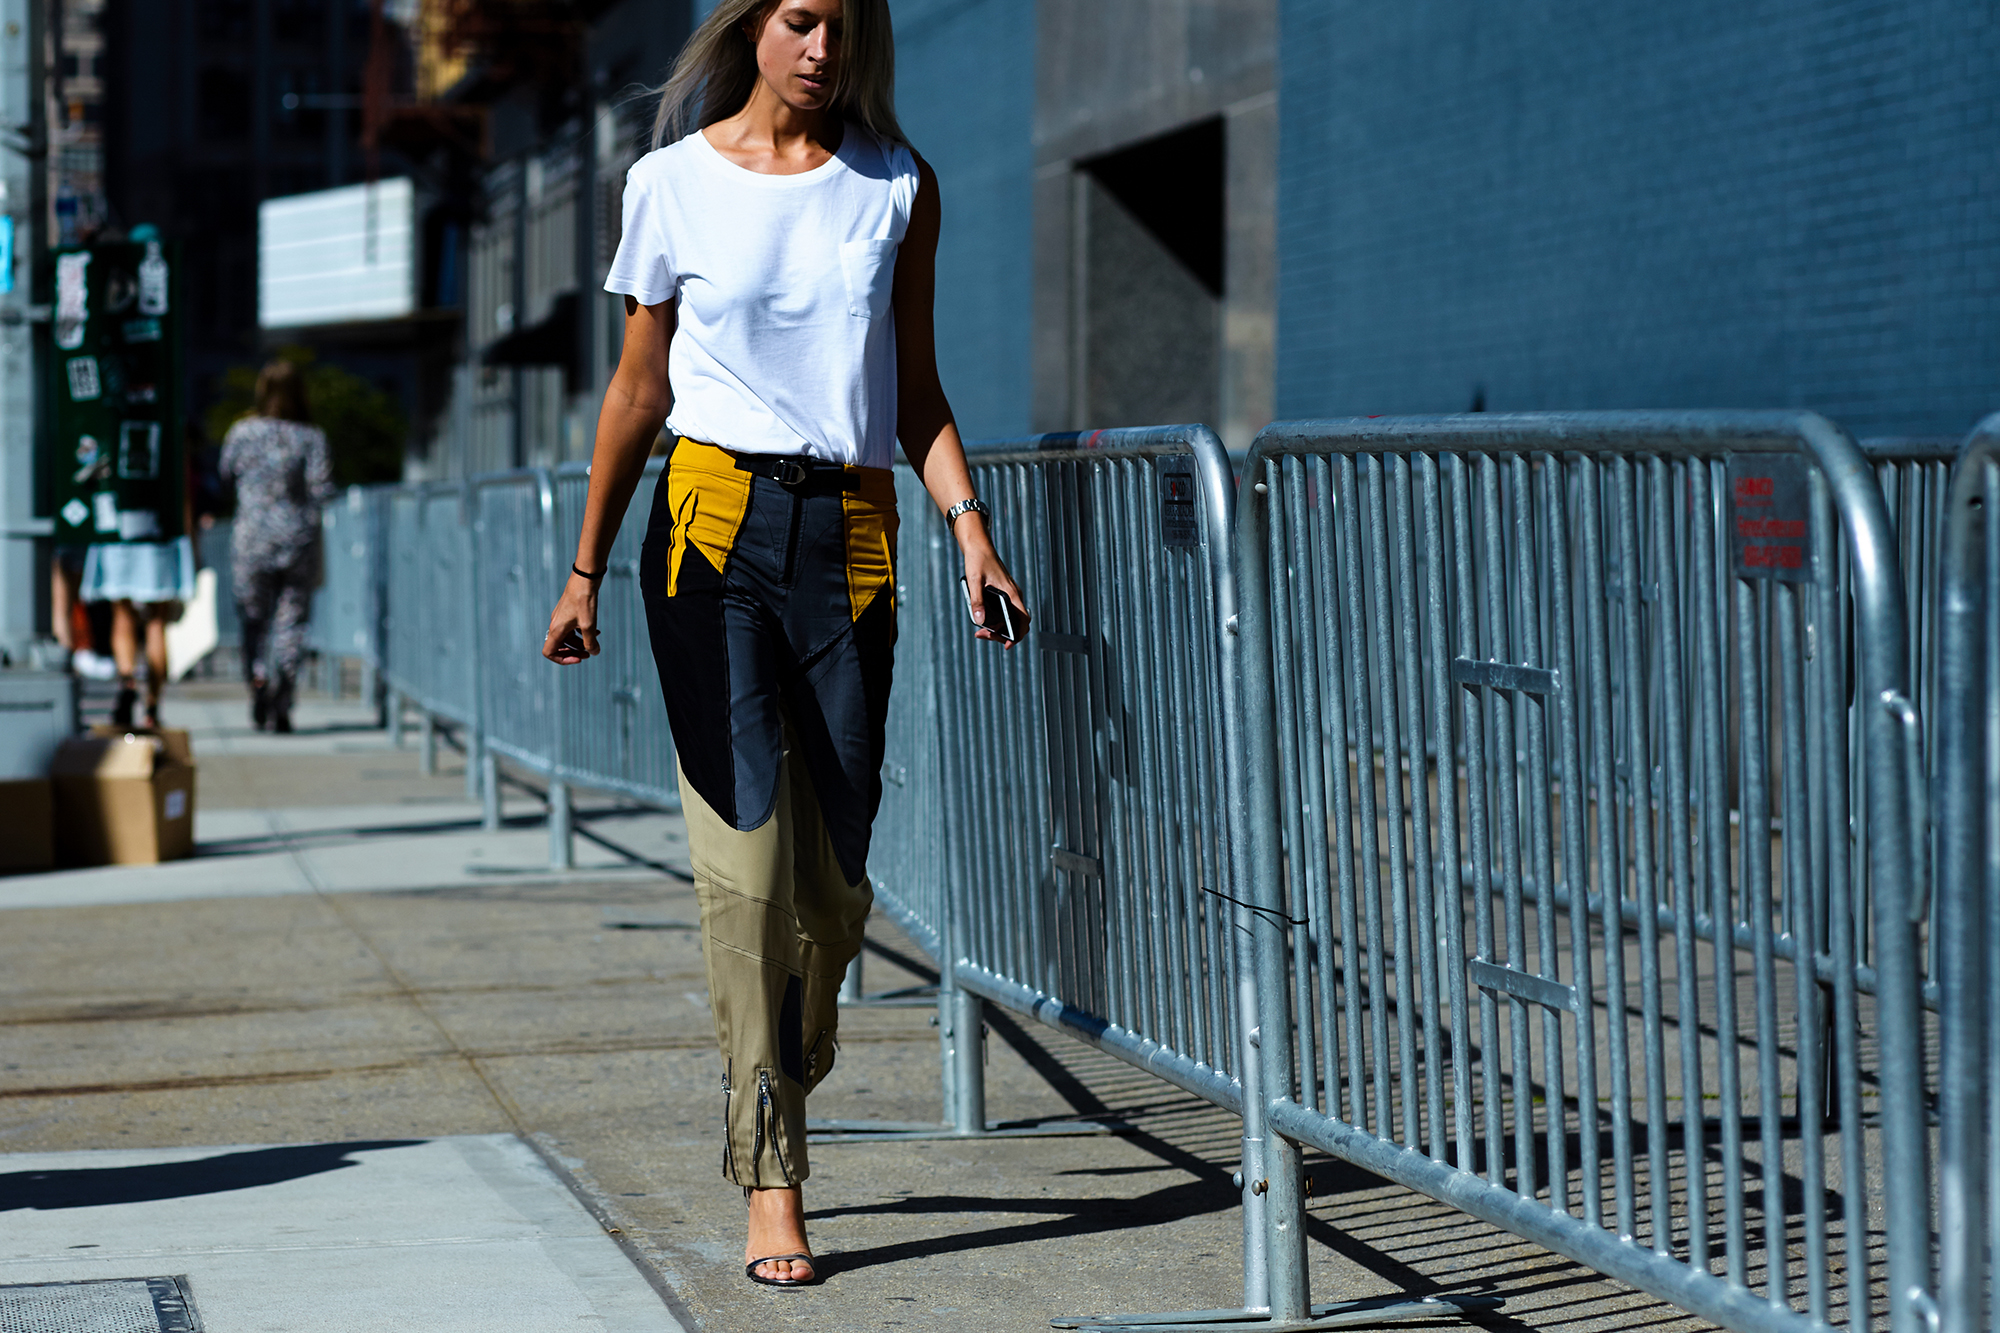 NYFW Spring-Summer 2017 Streetstyle: Sarah Harris wearing a white tee and Louis Vuitton color block pants and silver sandals after a show in New York City